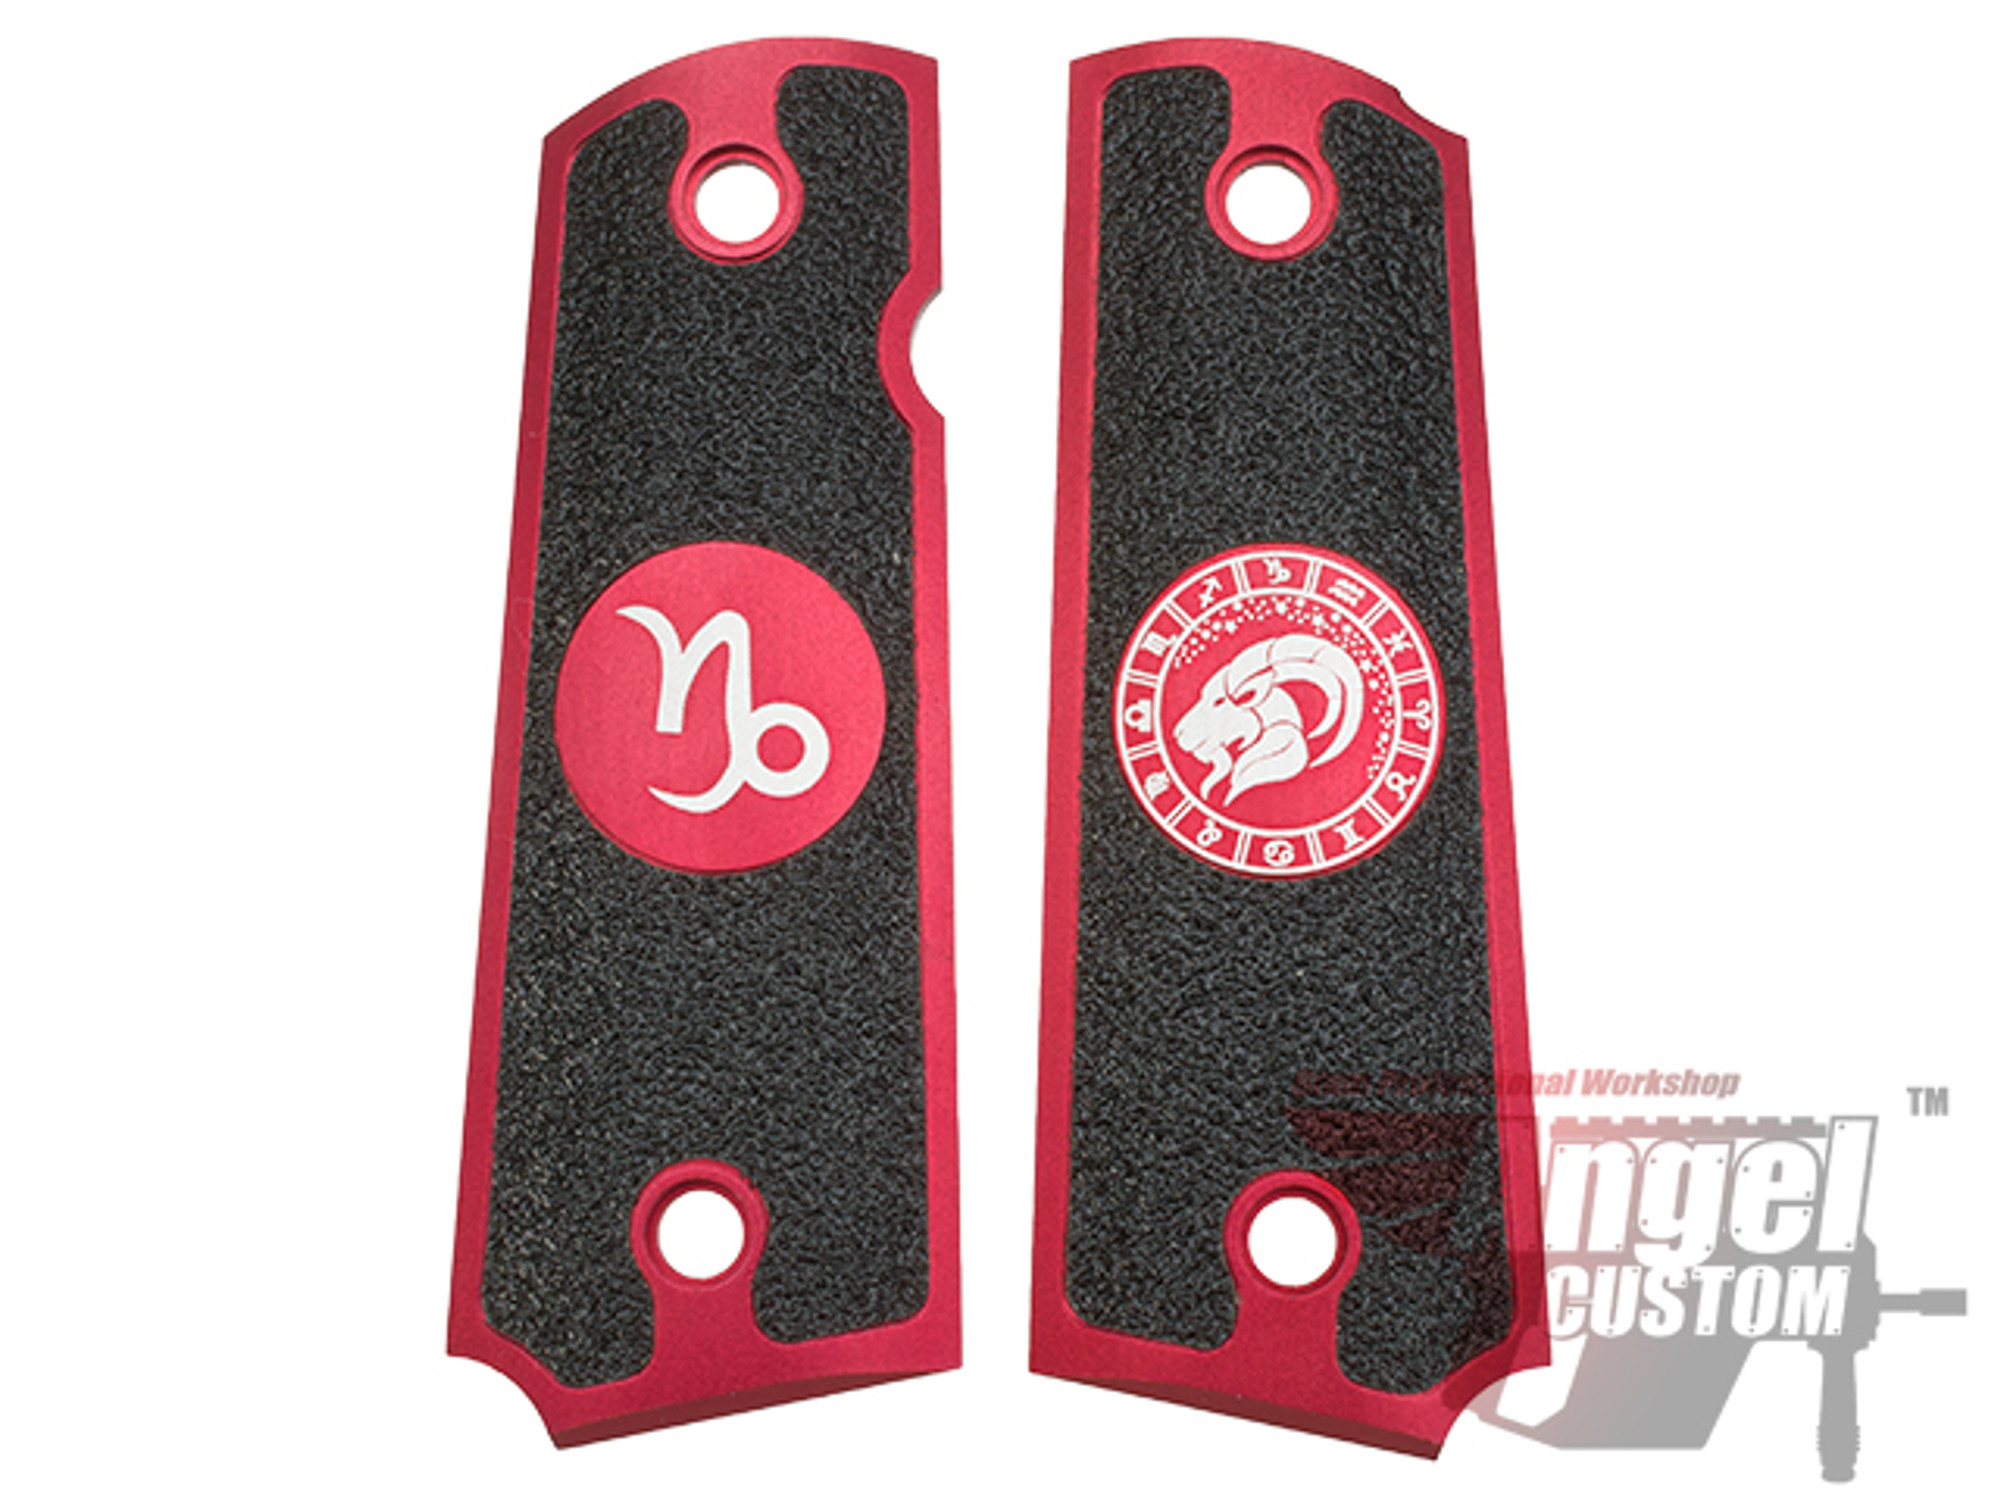 Angel Custom CNC Machined Tac-Glove "Zodiac" Grips for Tokyo Marui/KWA/Western Arms 1911 Series Airsoft Pistols - Capricorn (Red)